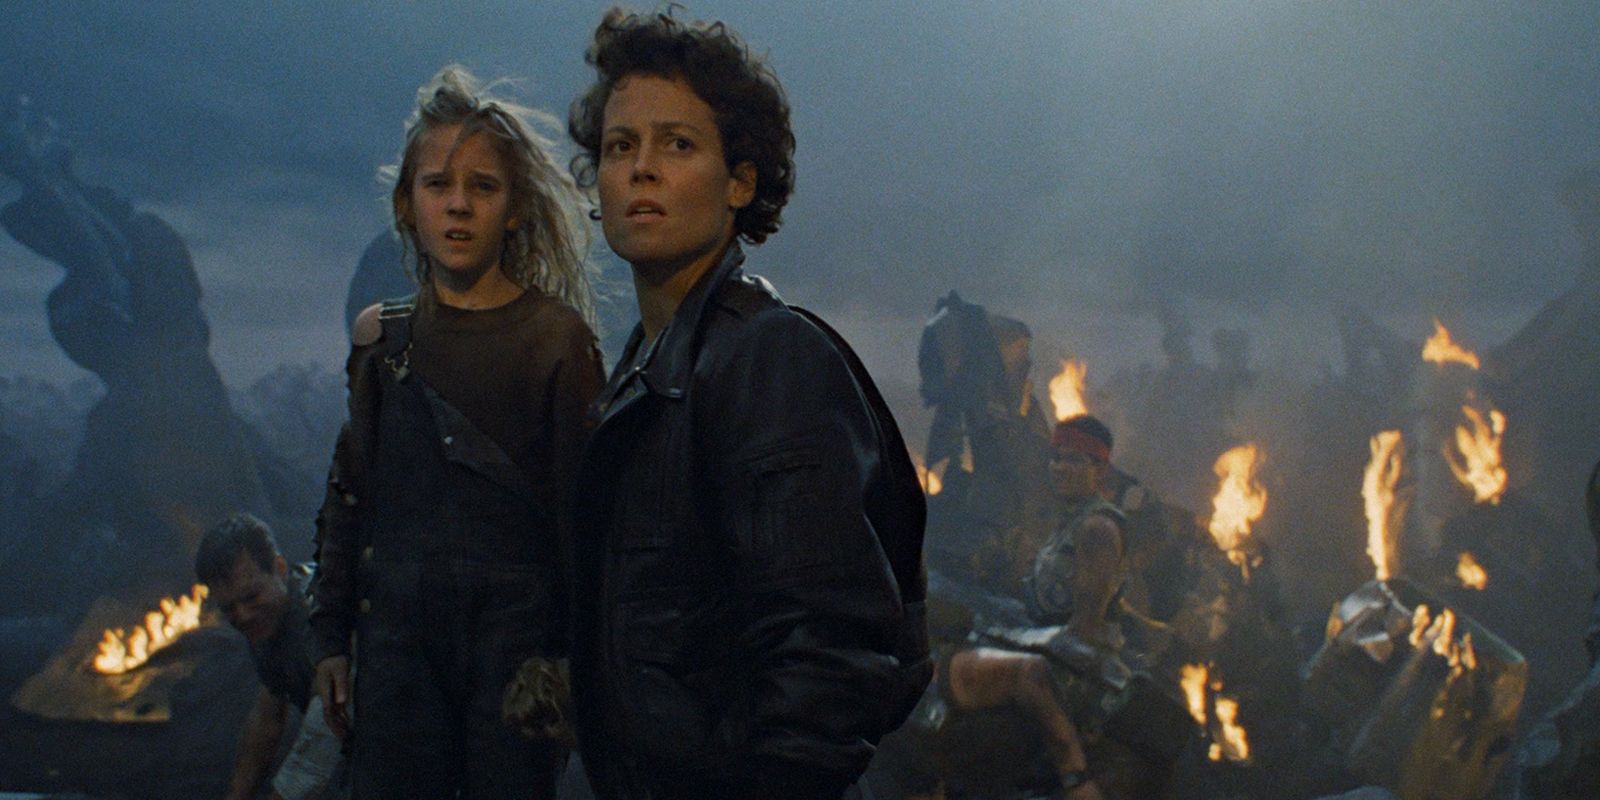 Sigourney Weaver as Ripley and Newt in Aliens